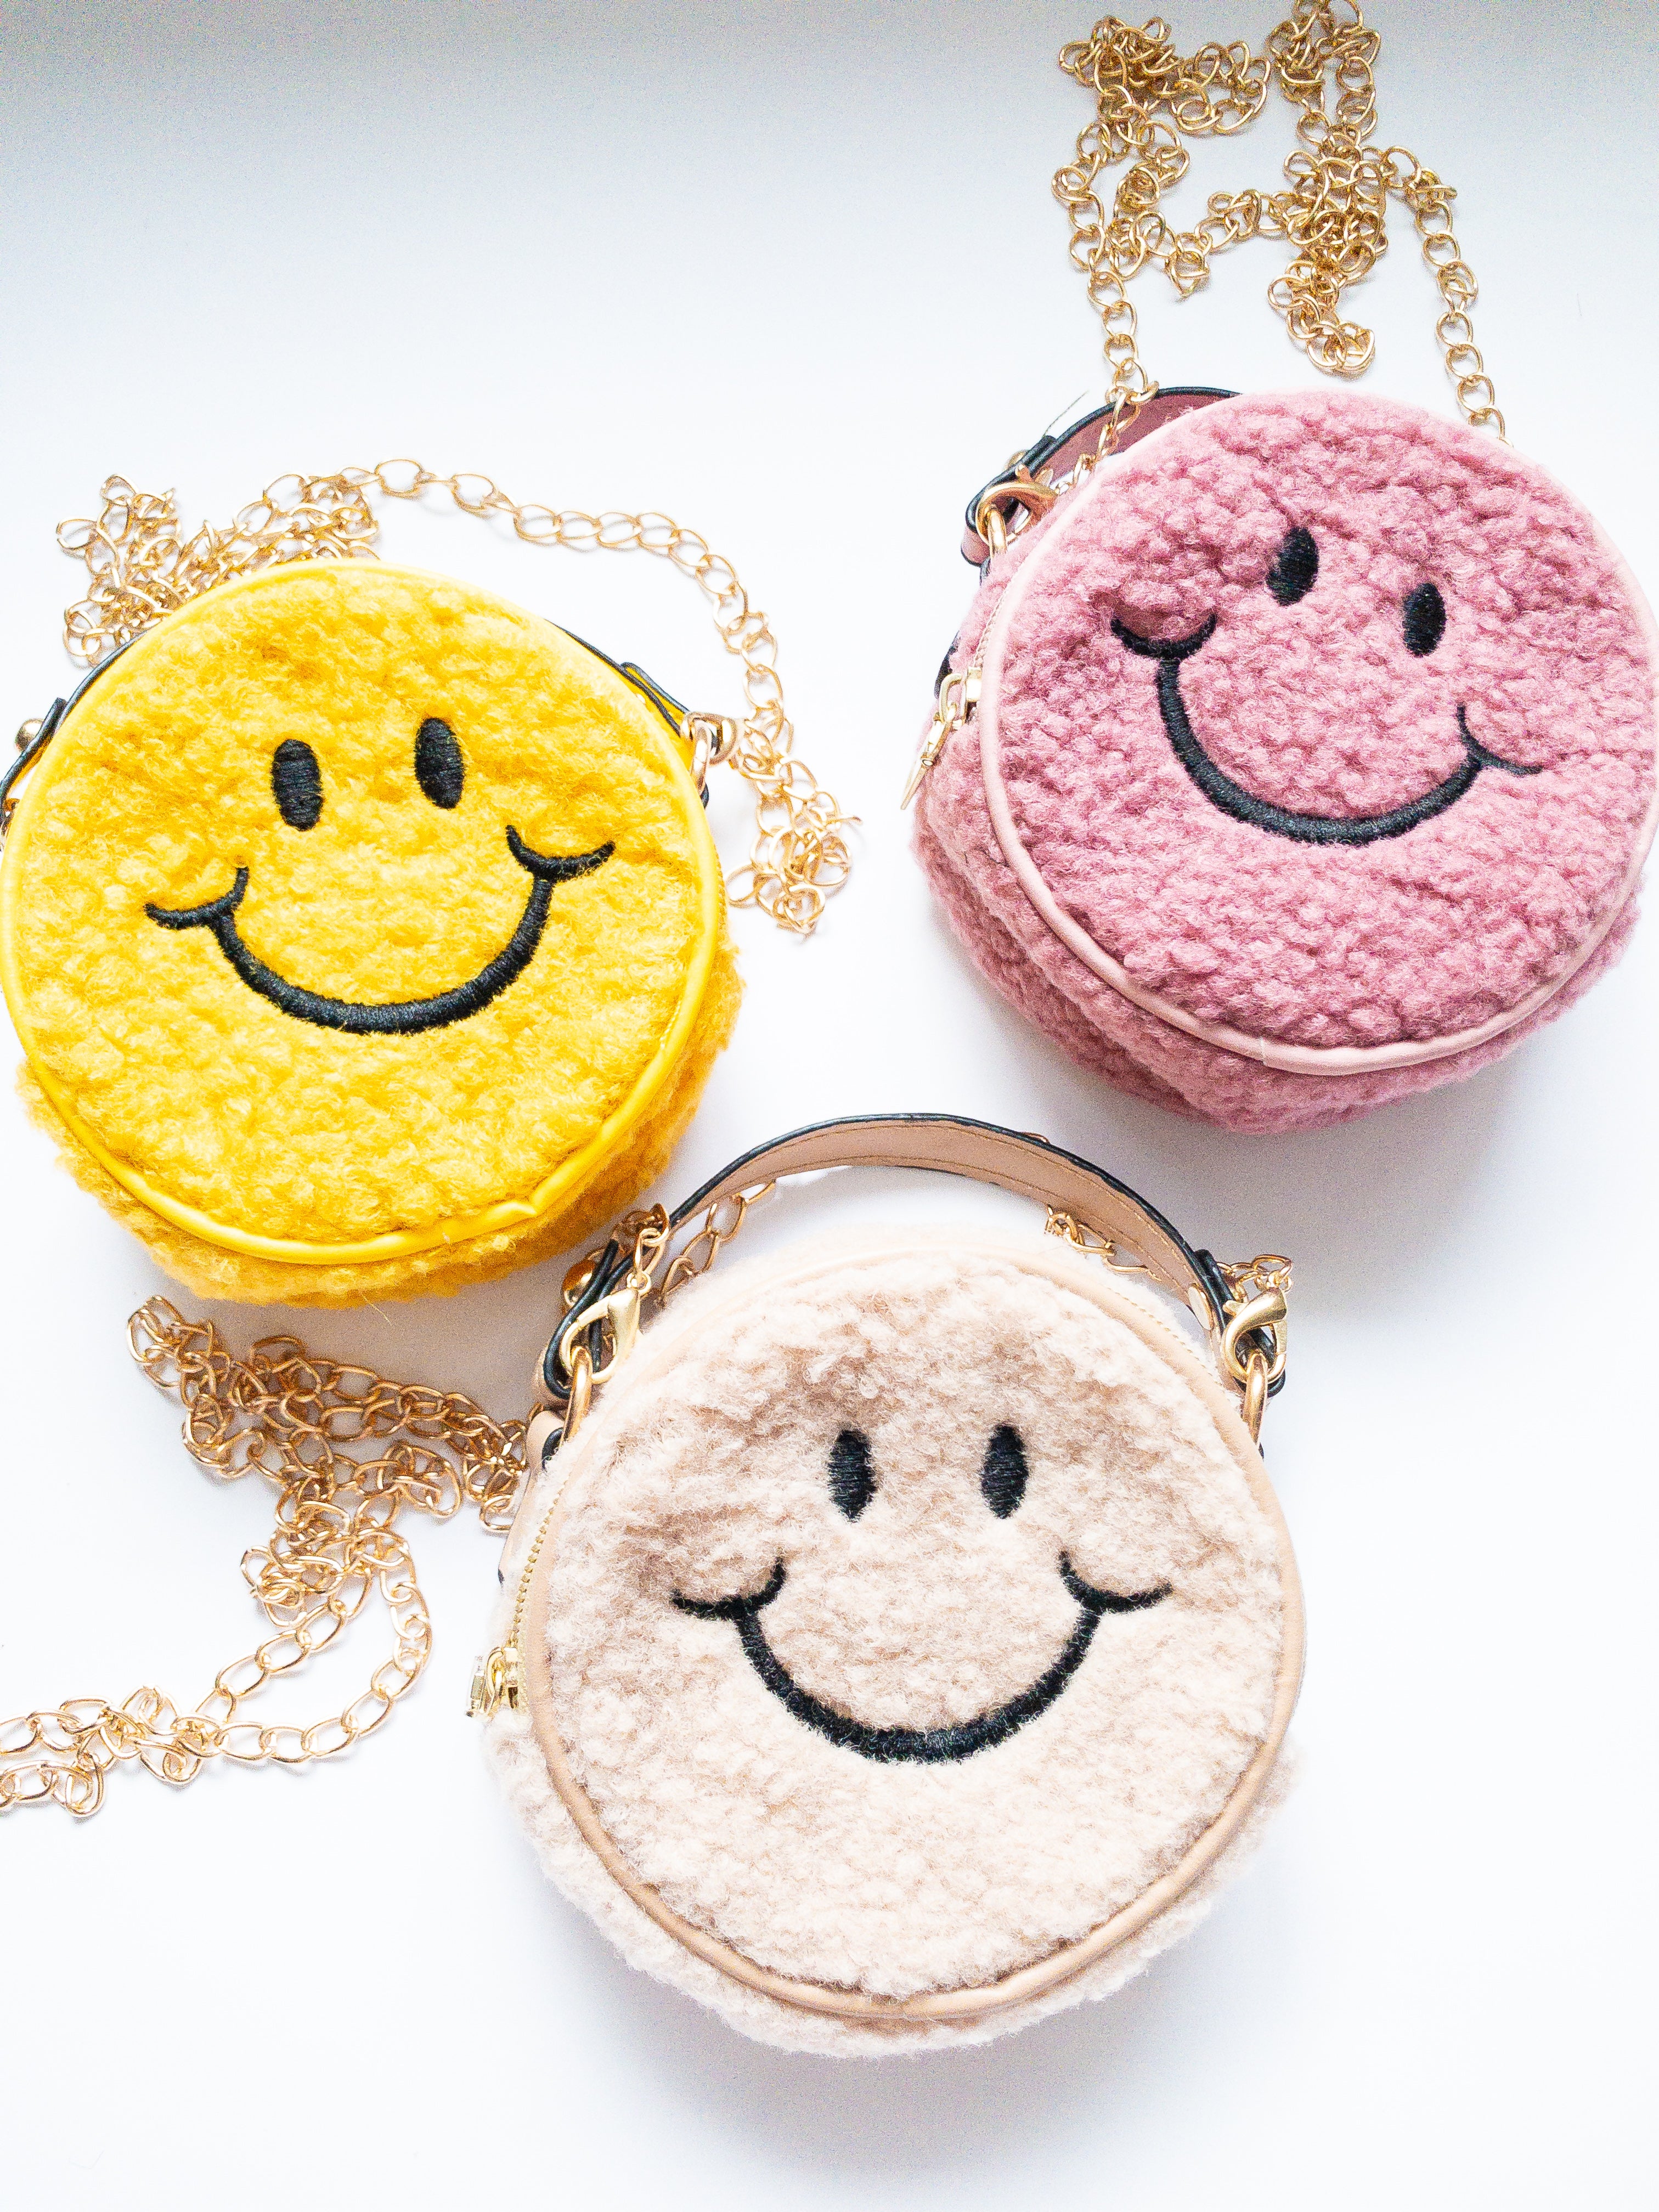 File:Have a nice day and smiley face bag.jpg - Wikipedia